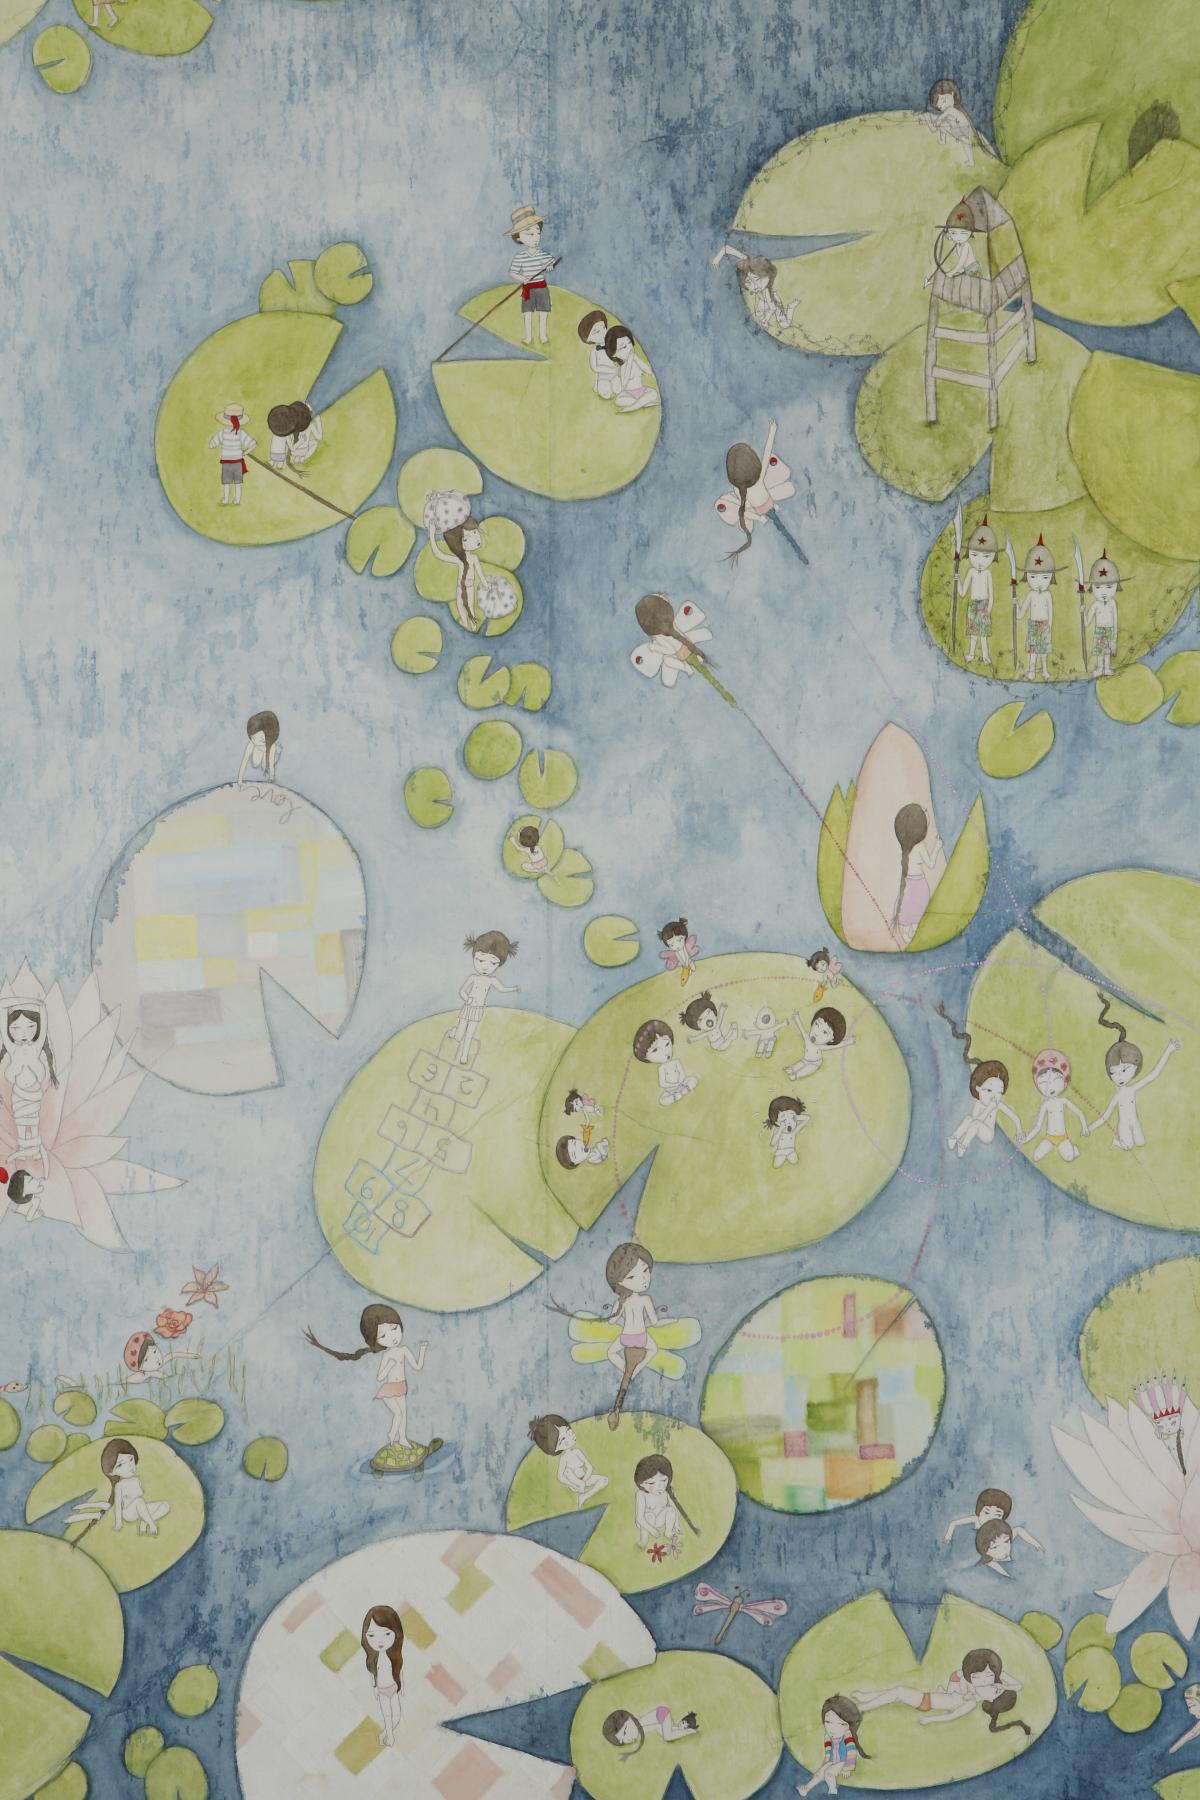 Artwork by Kyung Jeon titled Waterlilies Big Splash, 2012, Watercolor, gouache, pencil on rice paper on canvas, 59.5 x 108 inches, 151.1 x 274.3 cm